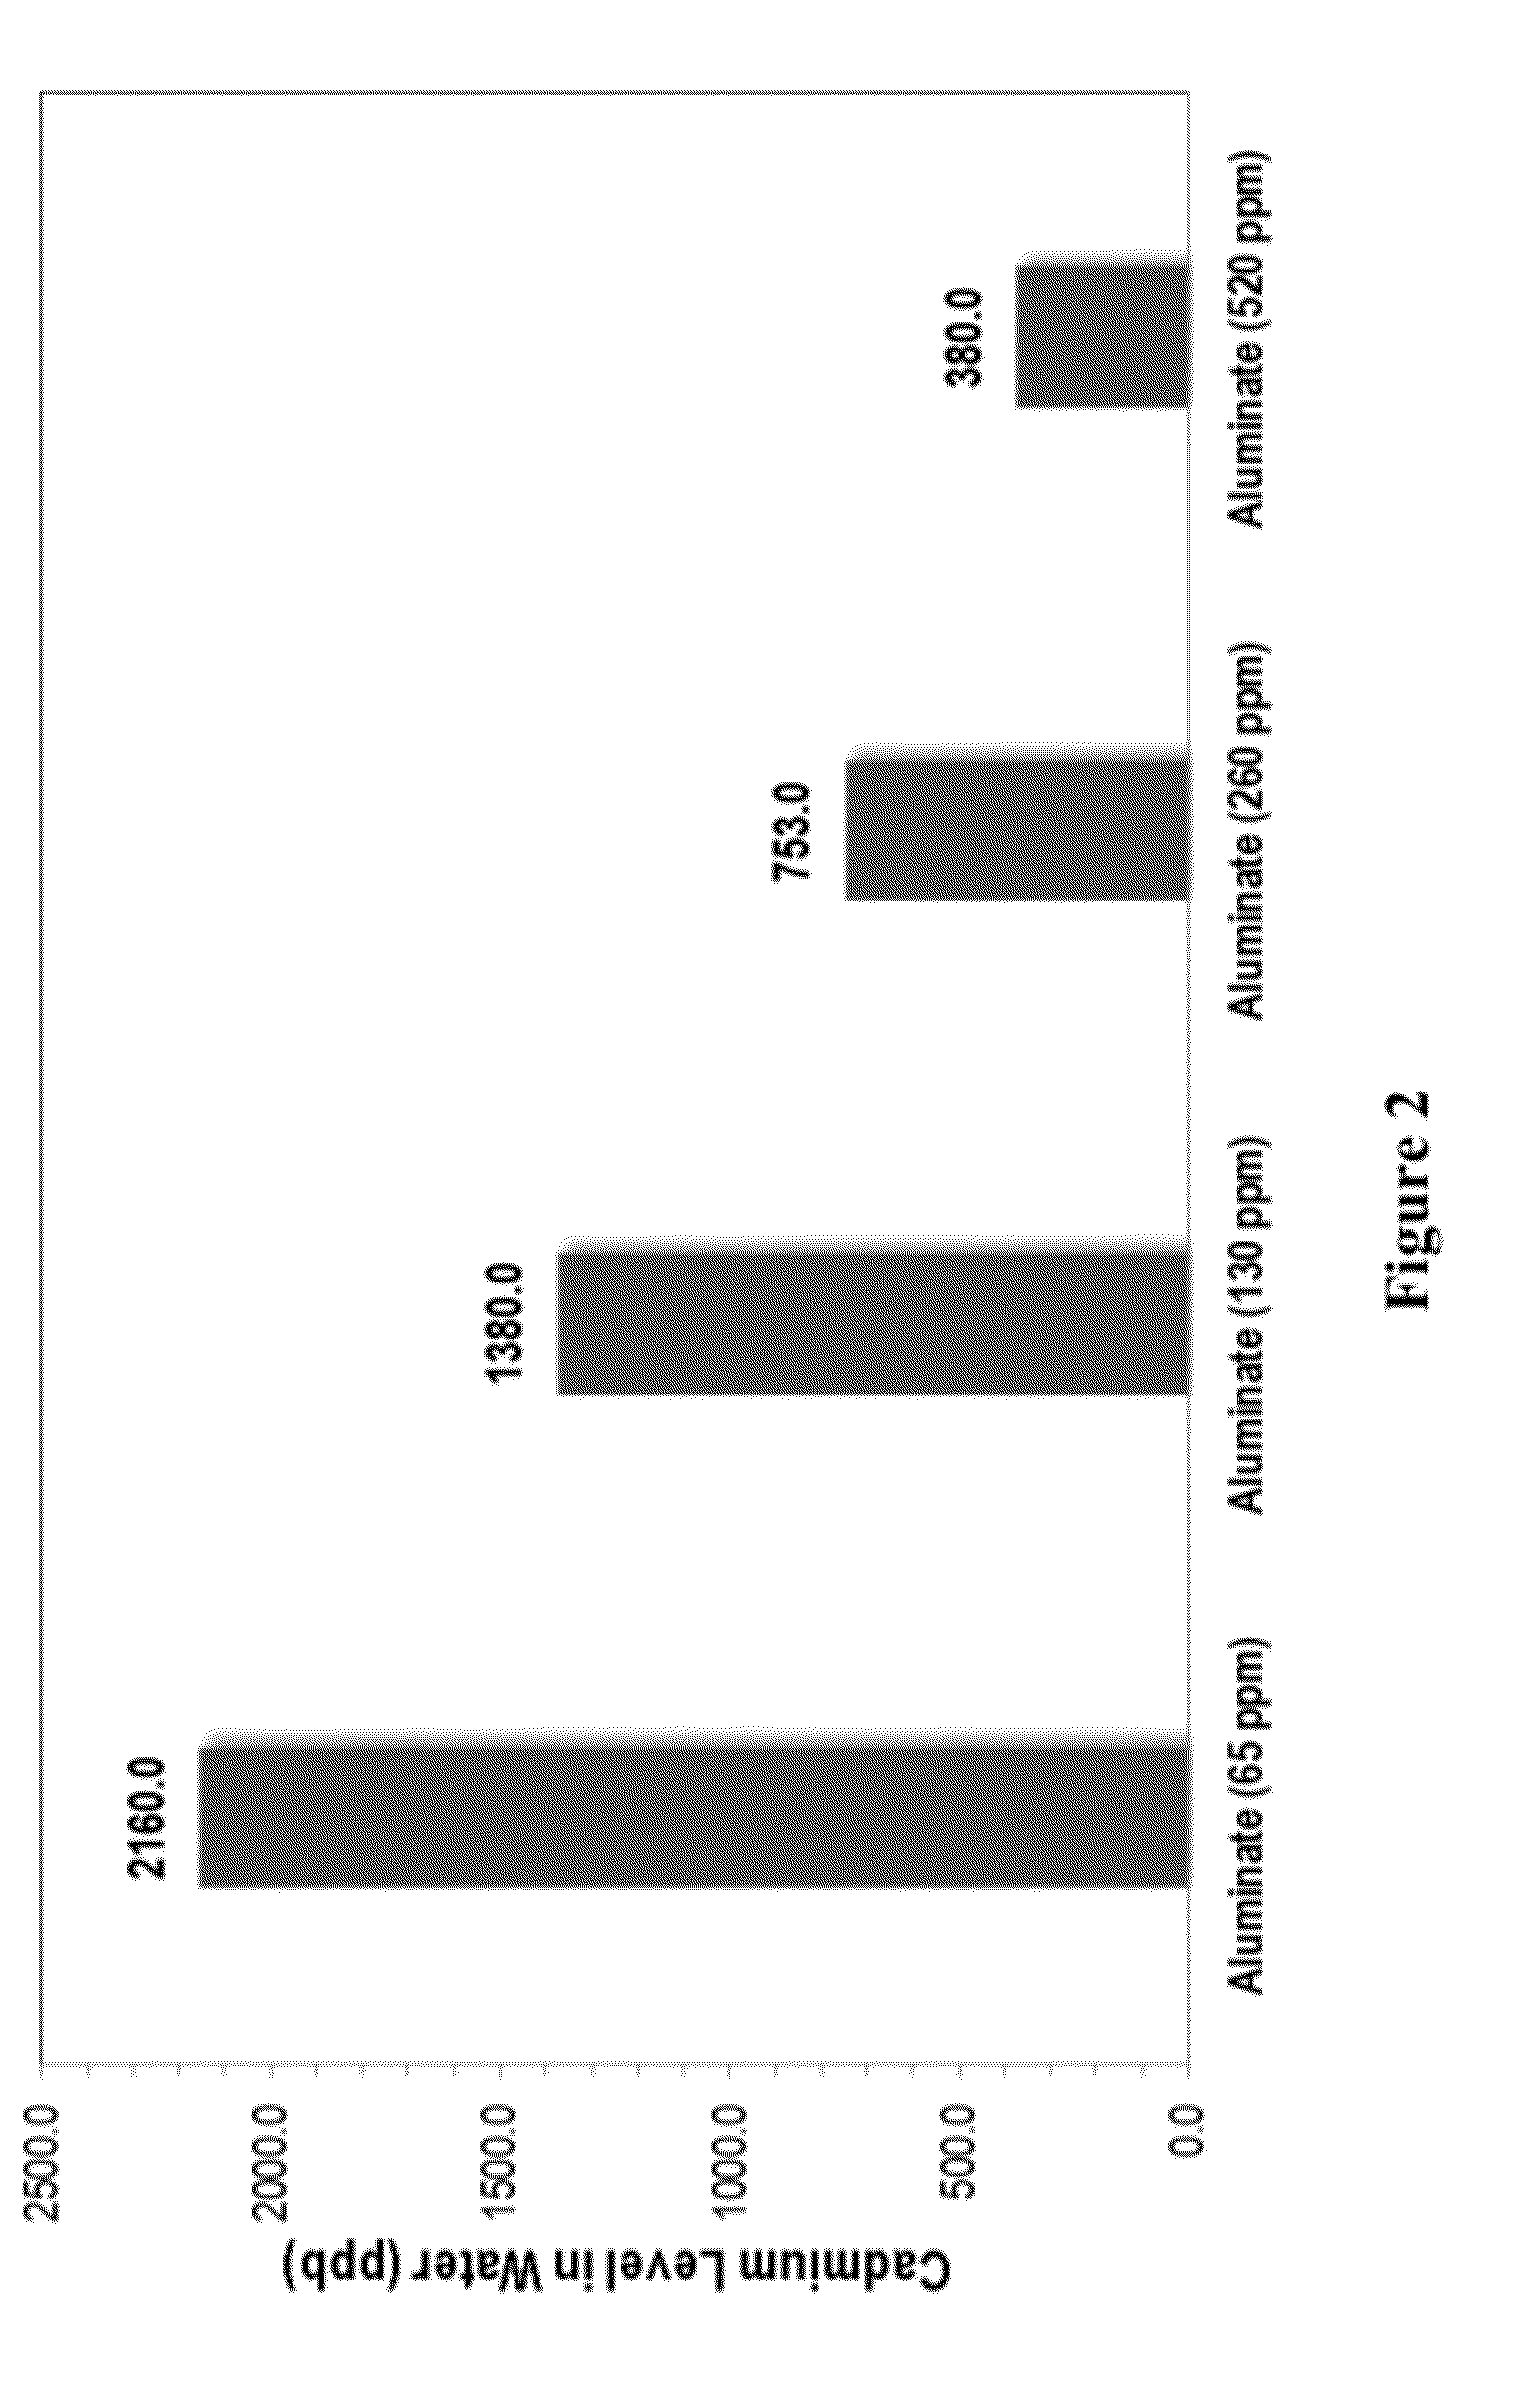 Methods for removing contaminants from aqueous systems